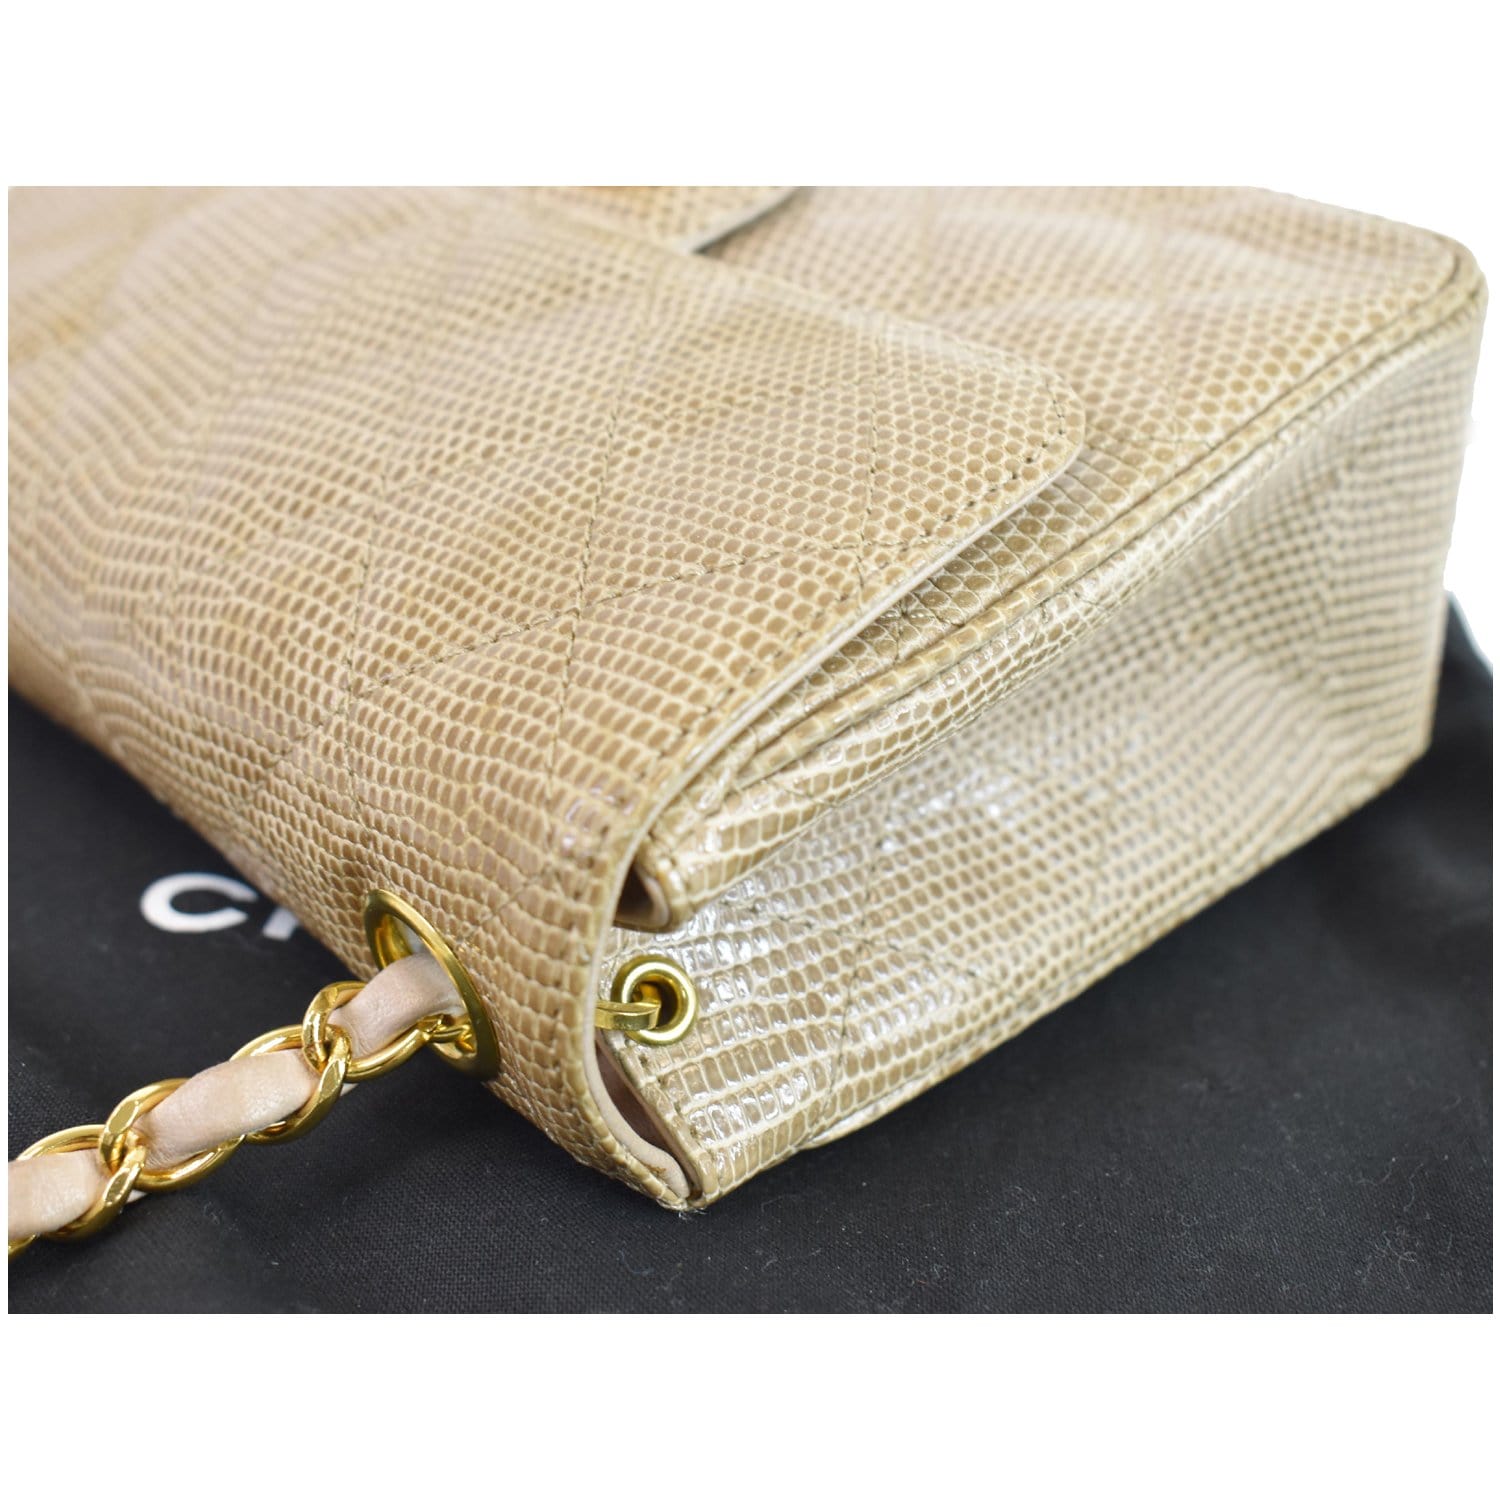 Chanel Beige Leather Gold Hardware Mini Square Flap Bag Chanel